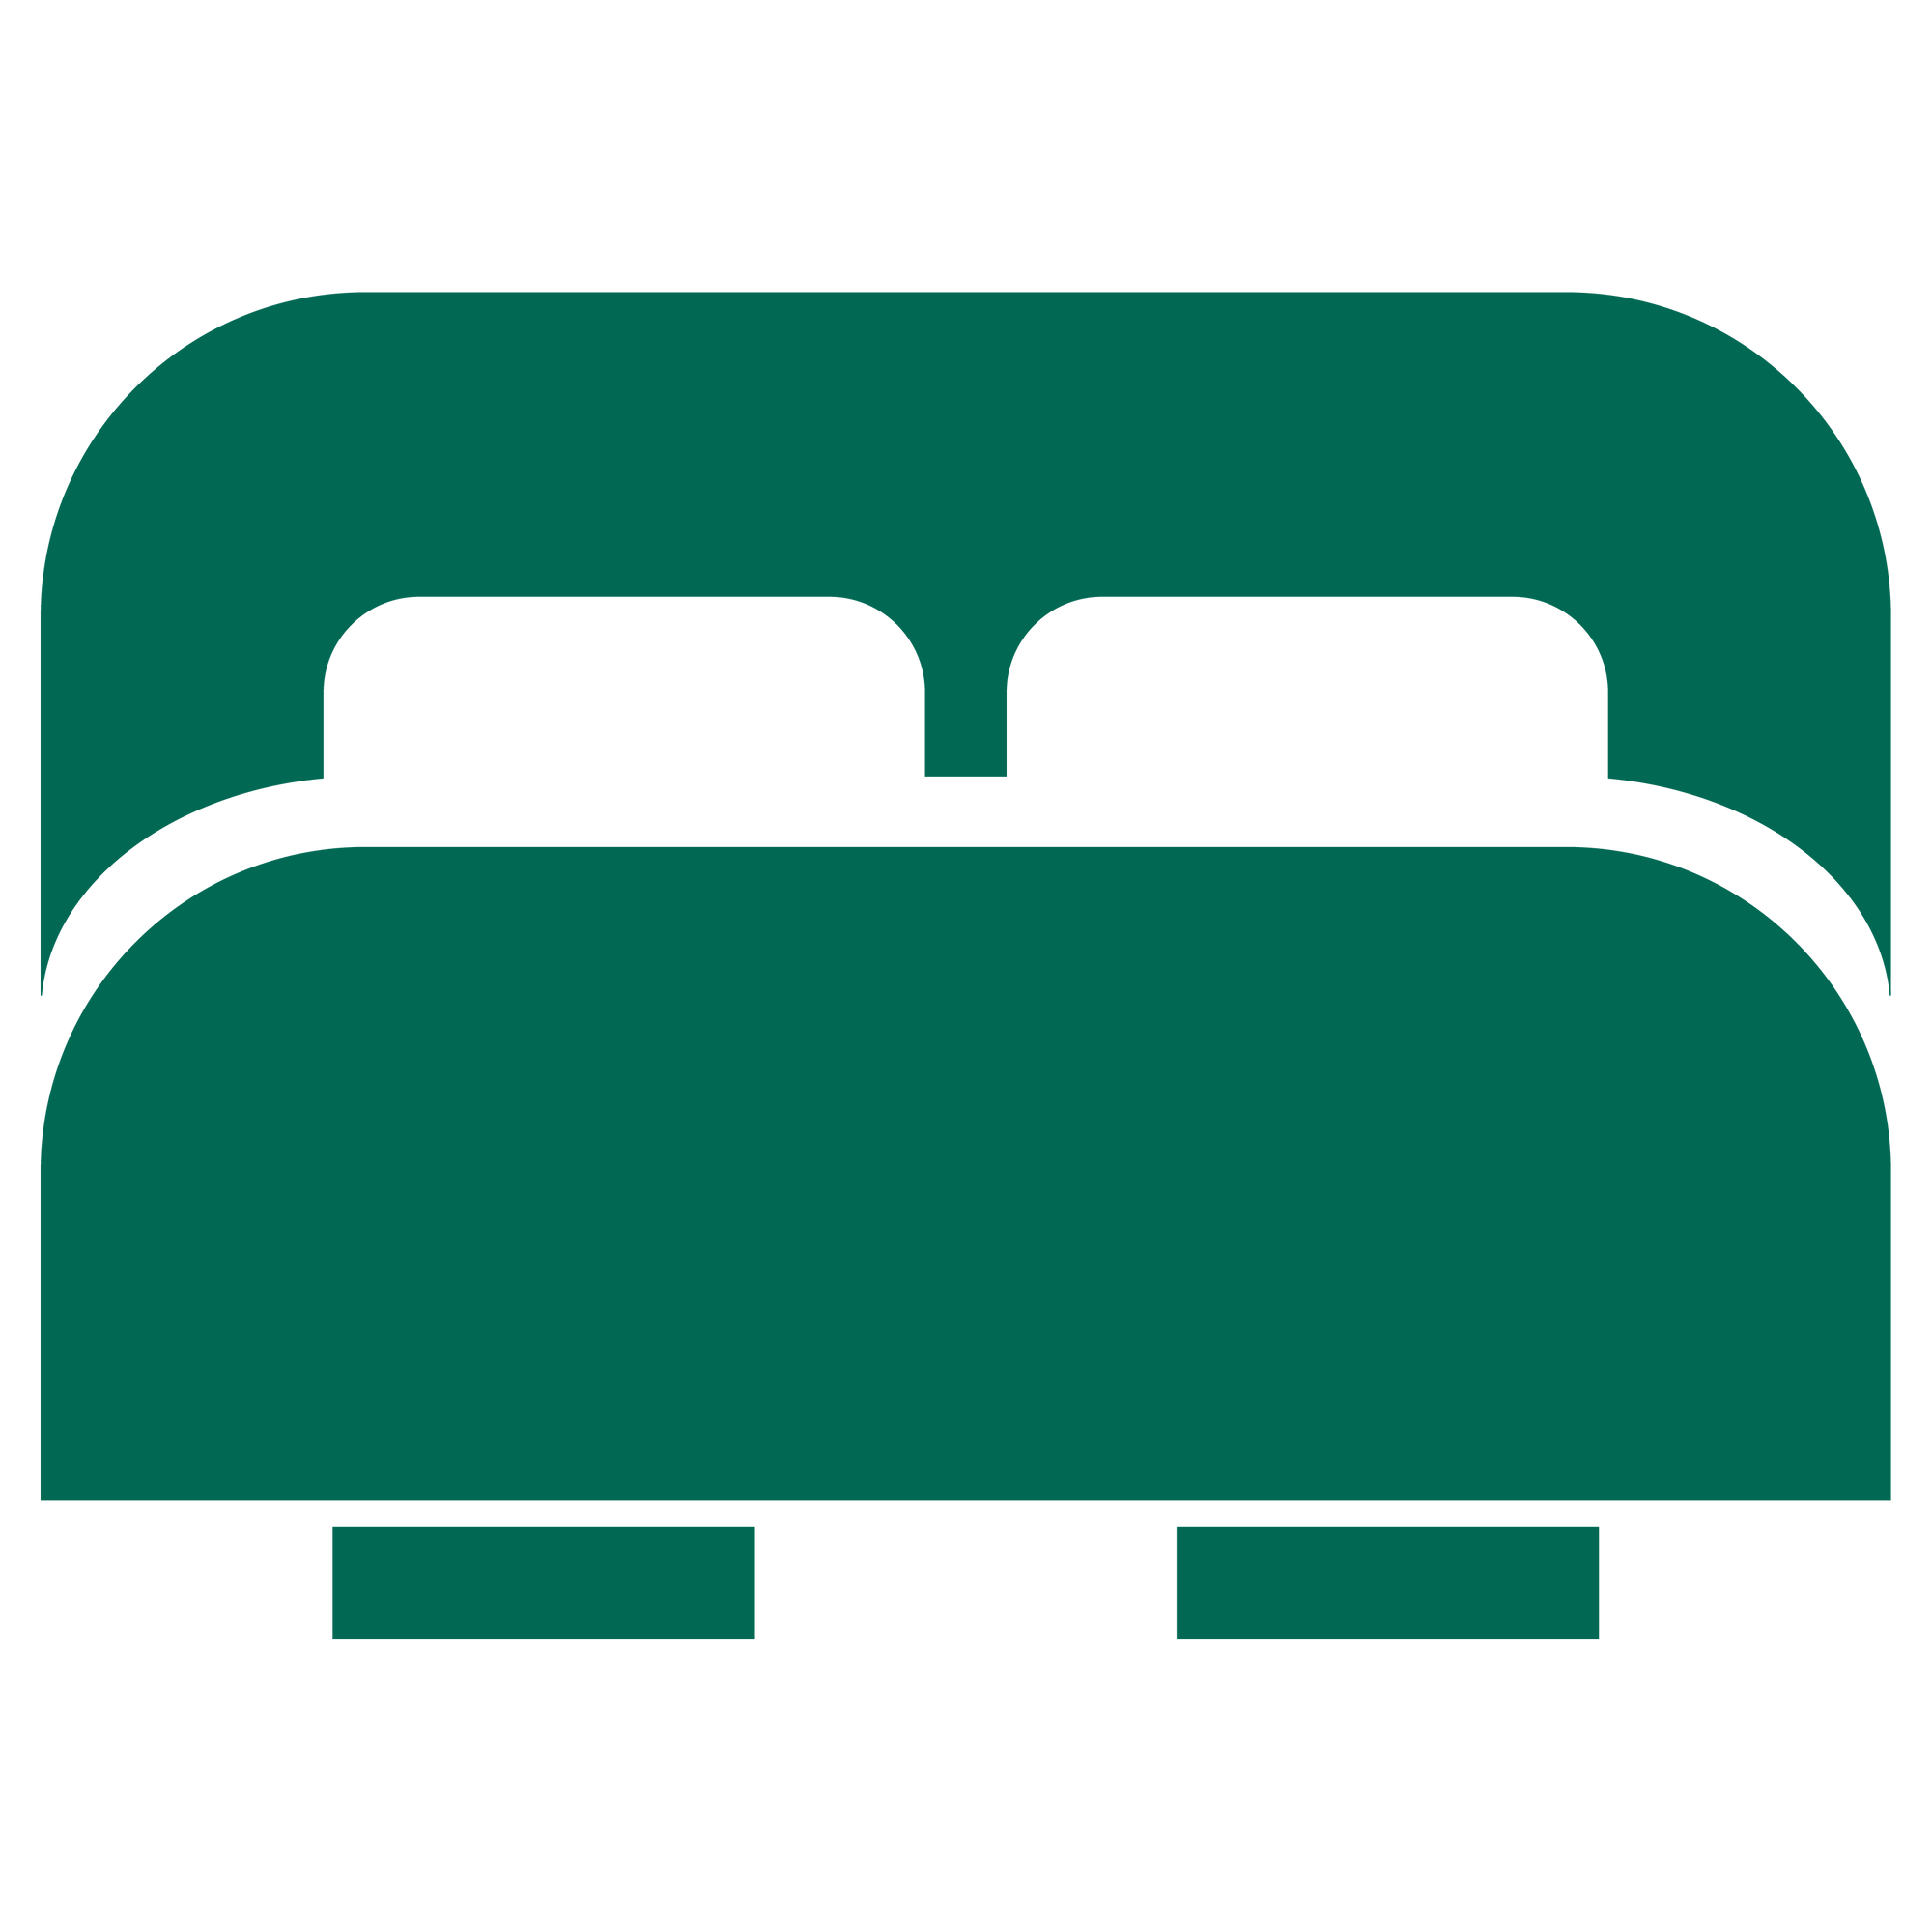 A vector icon used at Sunway Putra Hotel